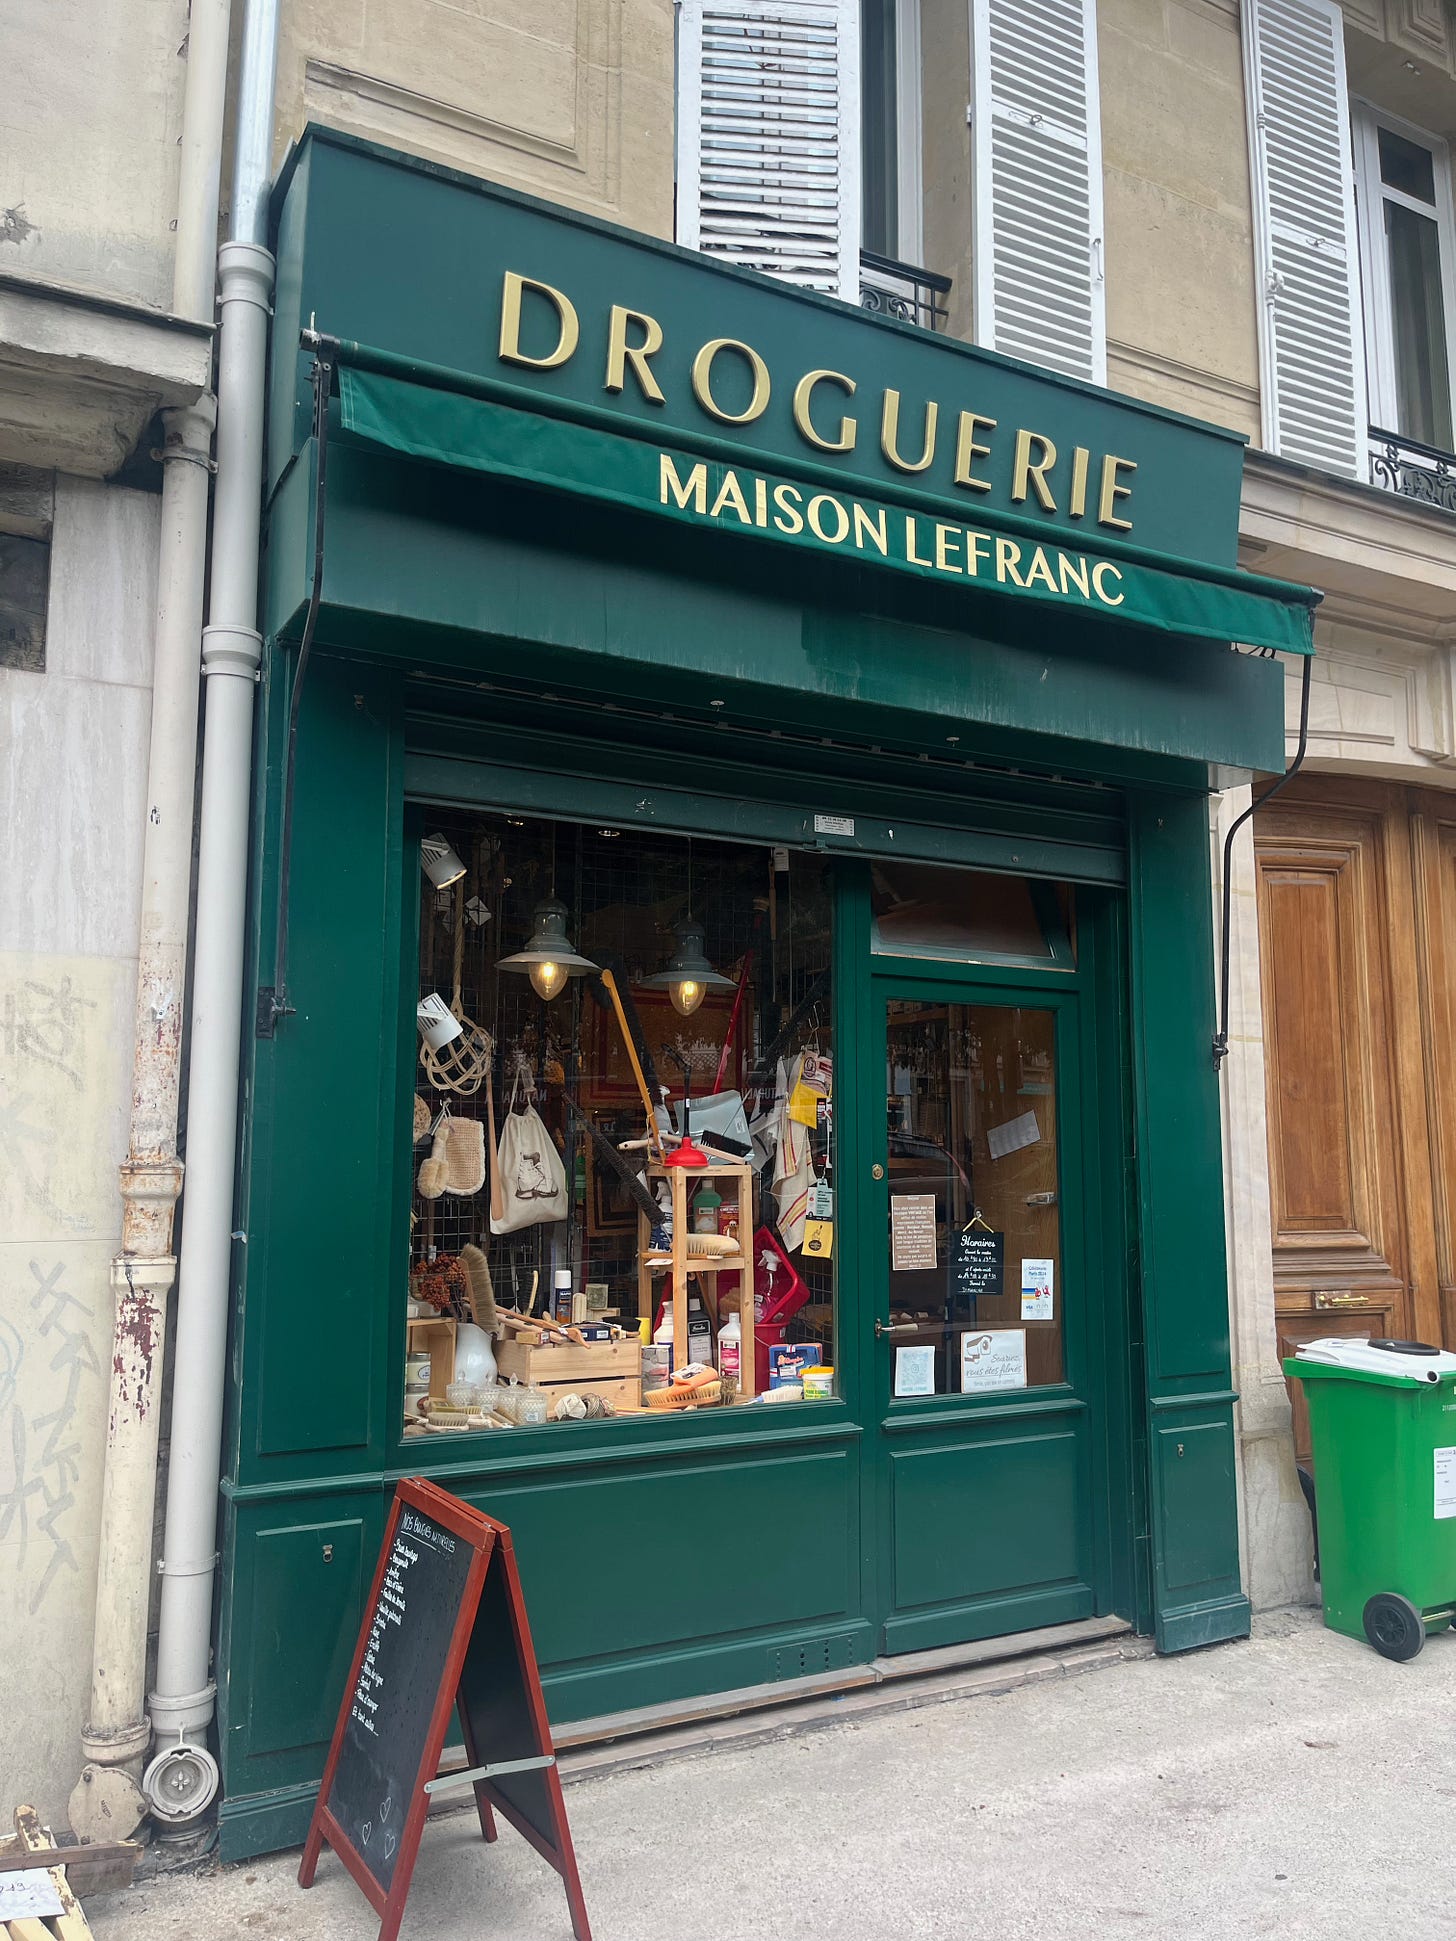 Seemingly-typical Parisian street-level storefront—but looks can be deceiving.